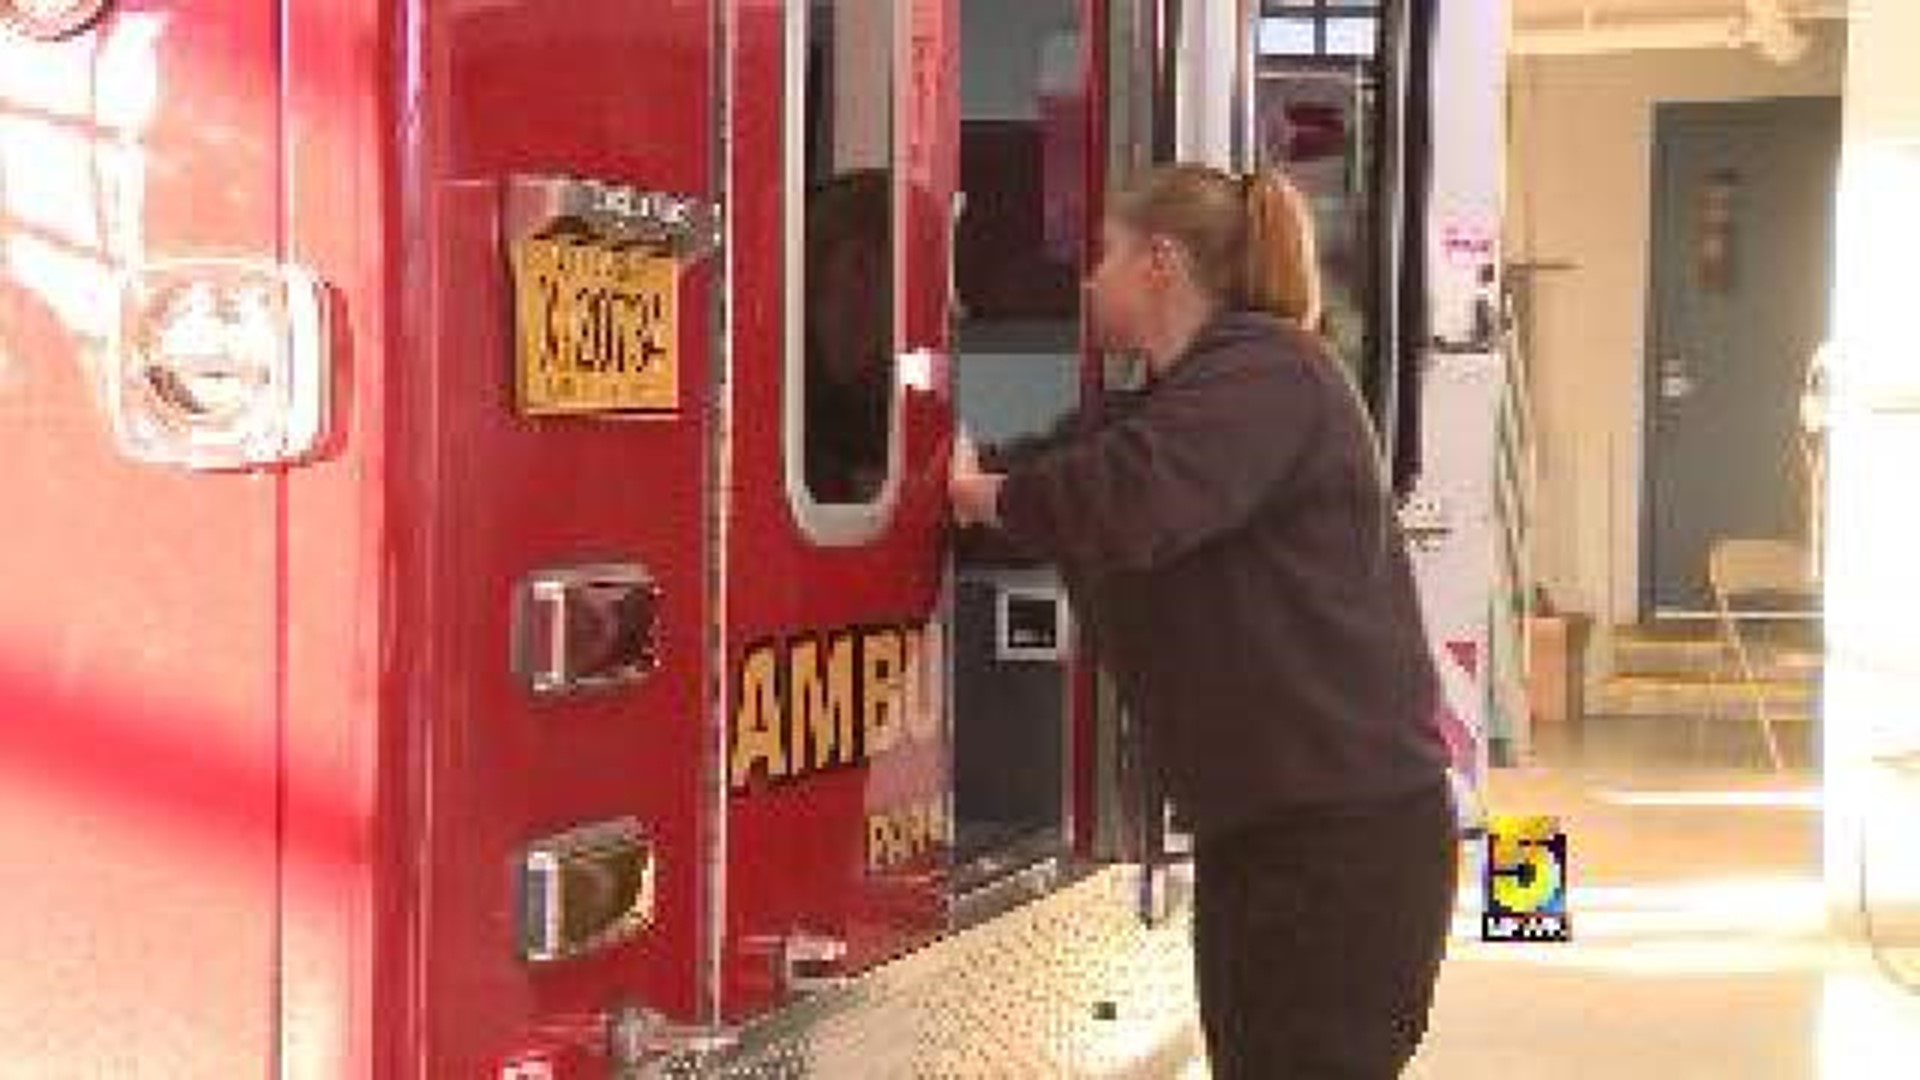 Ambulance Issue Moves Forward After Failed Vote